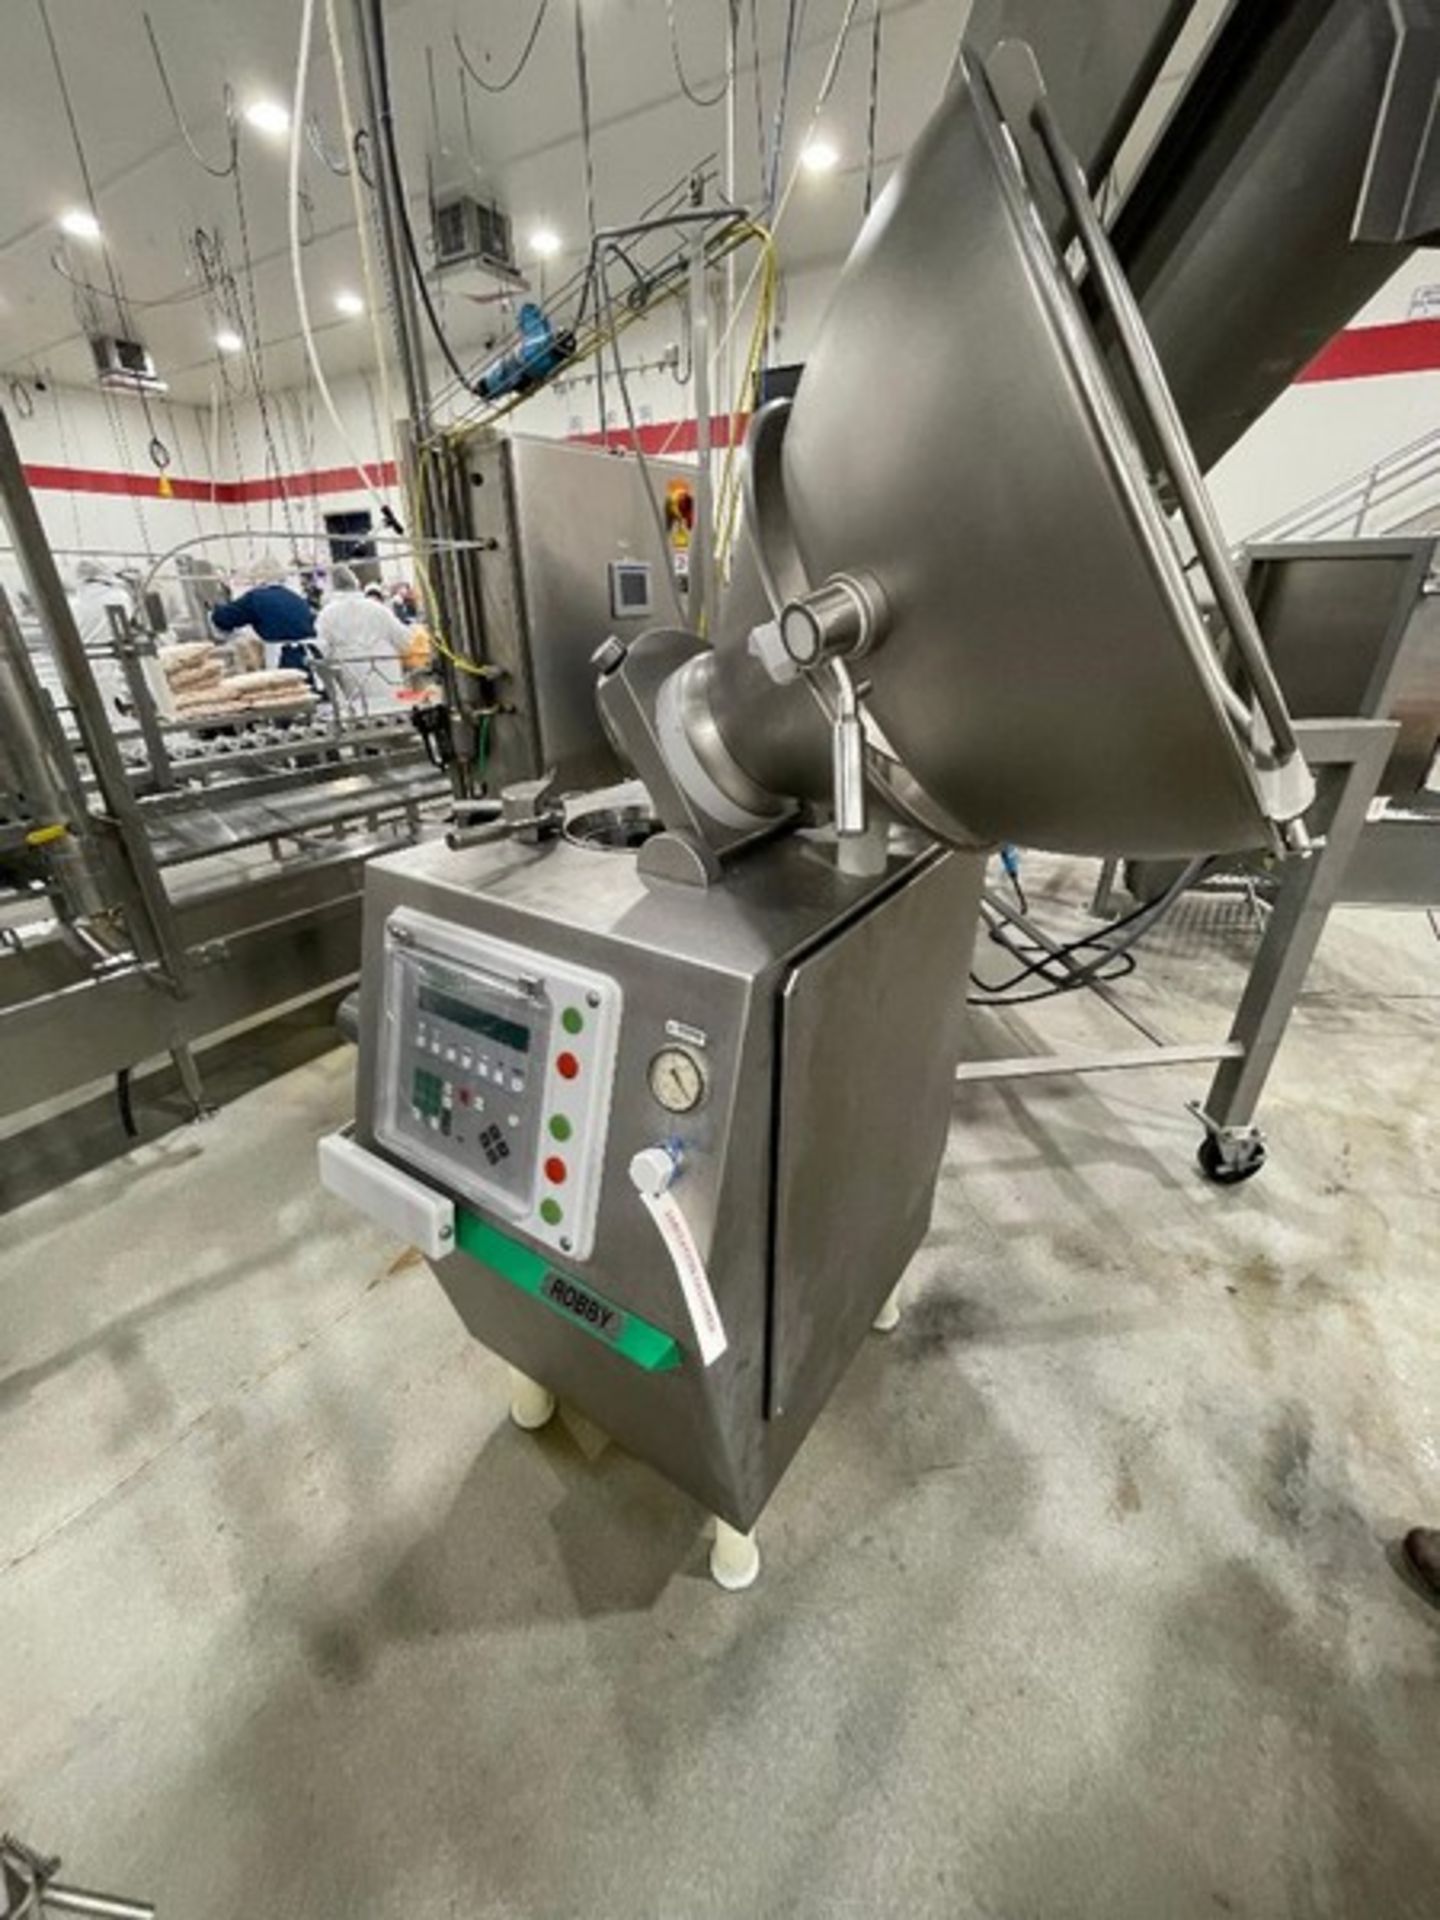 Vemag Robby All S/S Sanitary System, Mfg. 2012 with Touchpad Digital Controls, Numerous New Spare